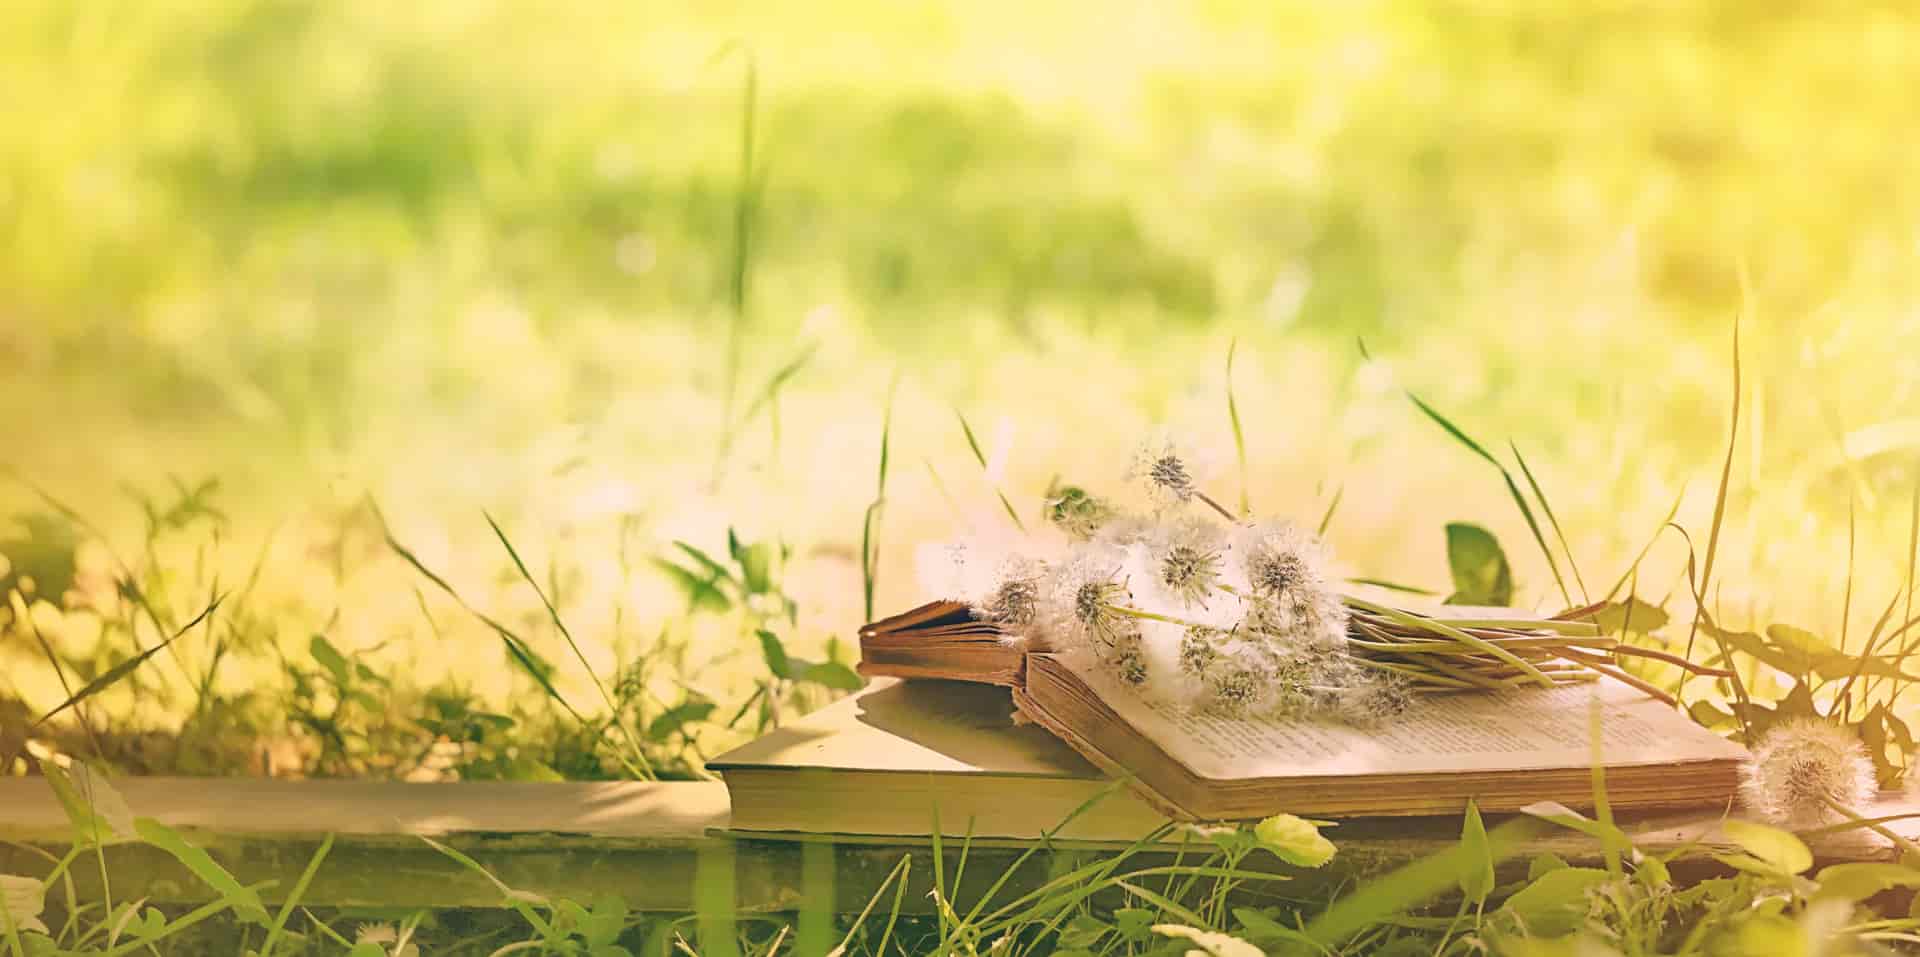 Herbalism for Beginners - 5 Books We Recommend